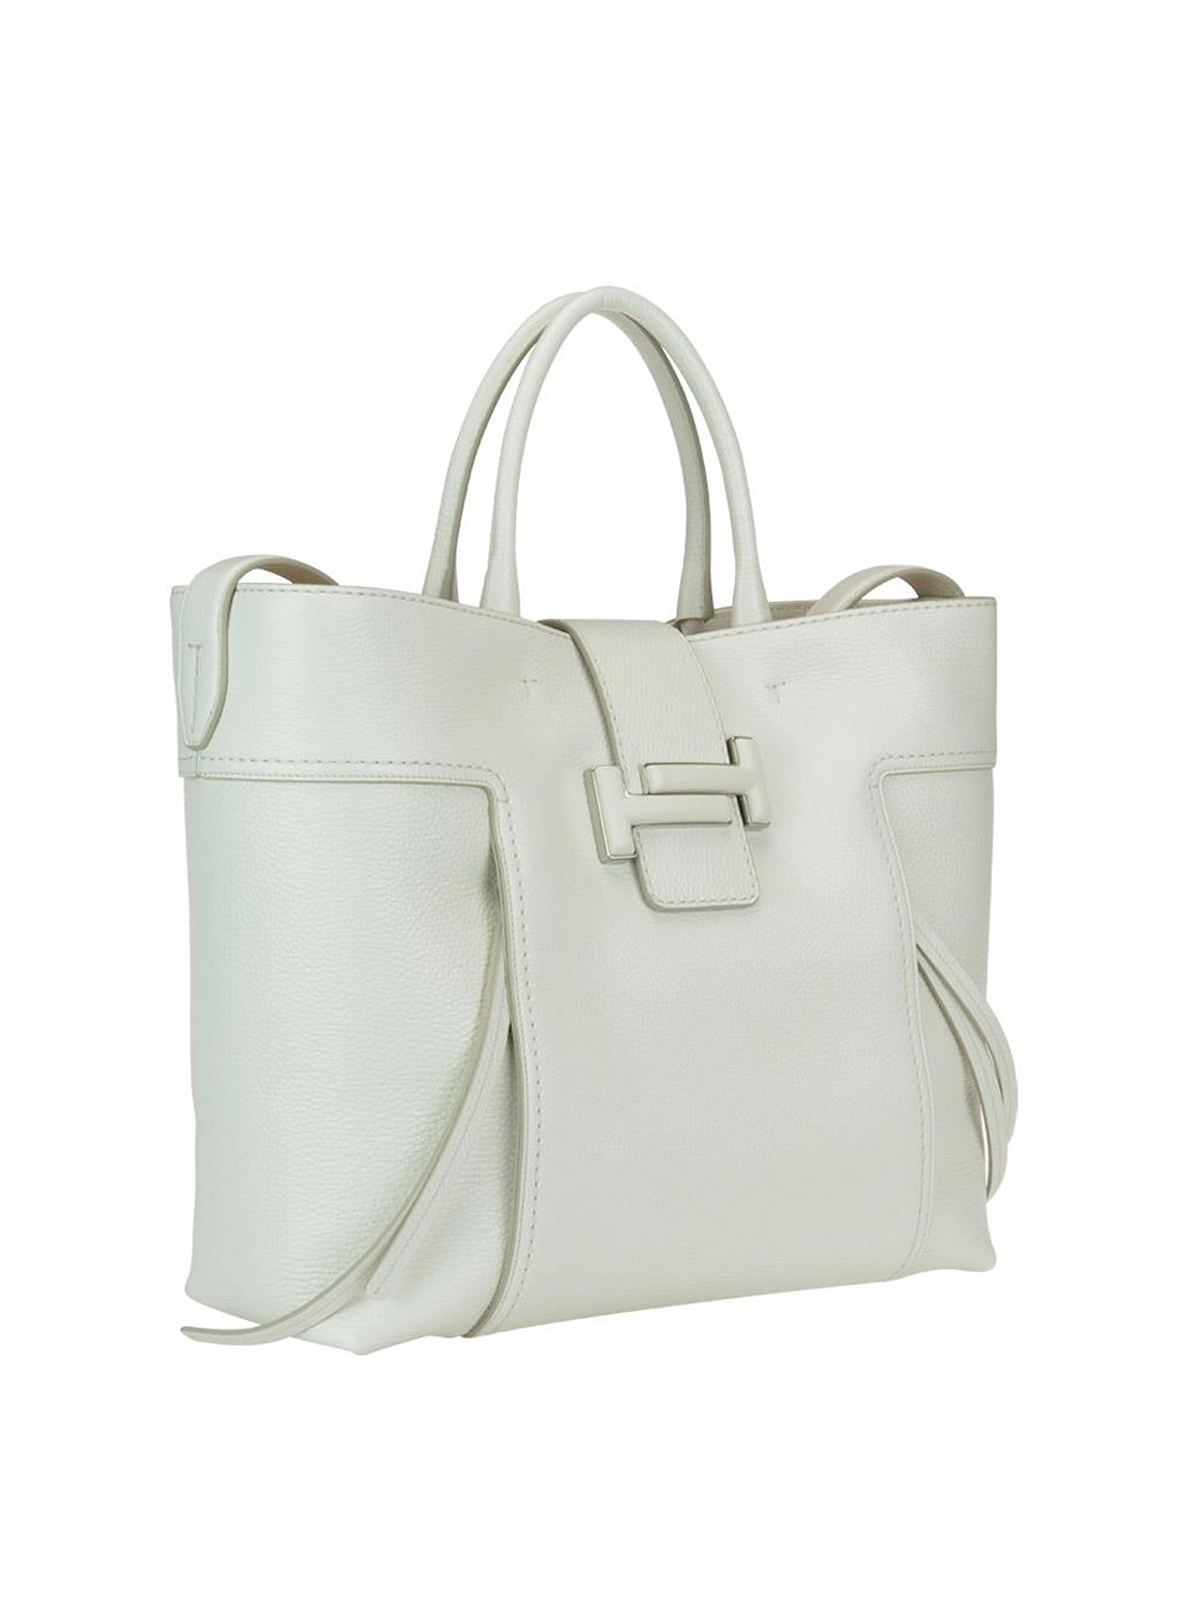 tod's double t shopping bag